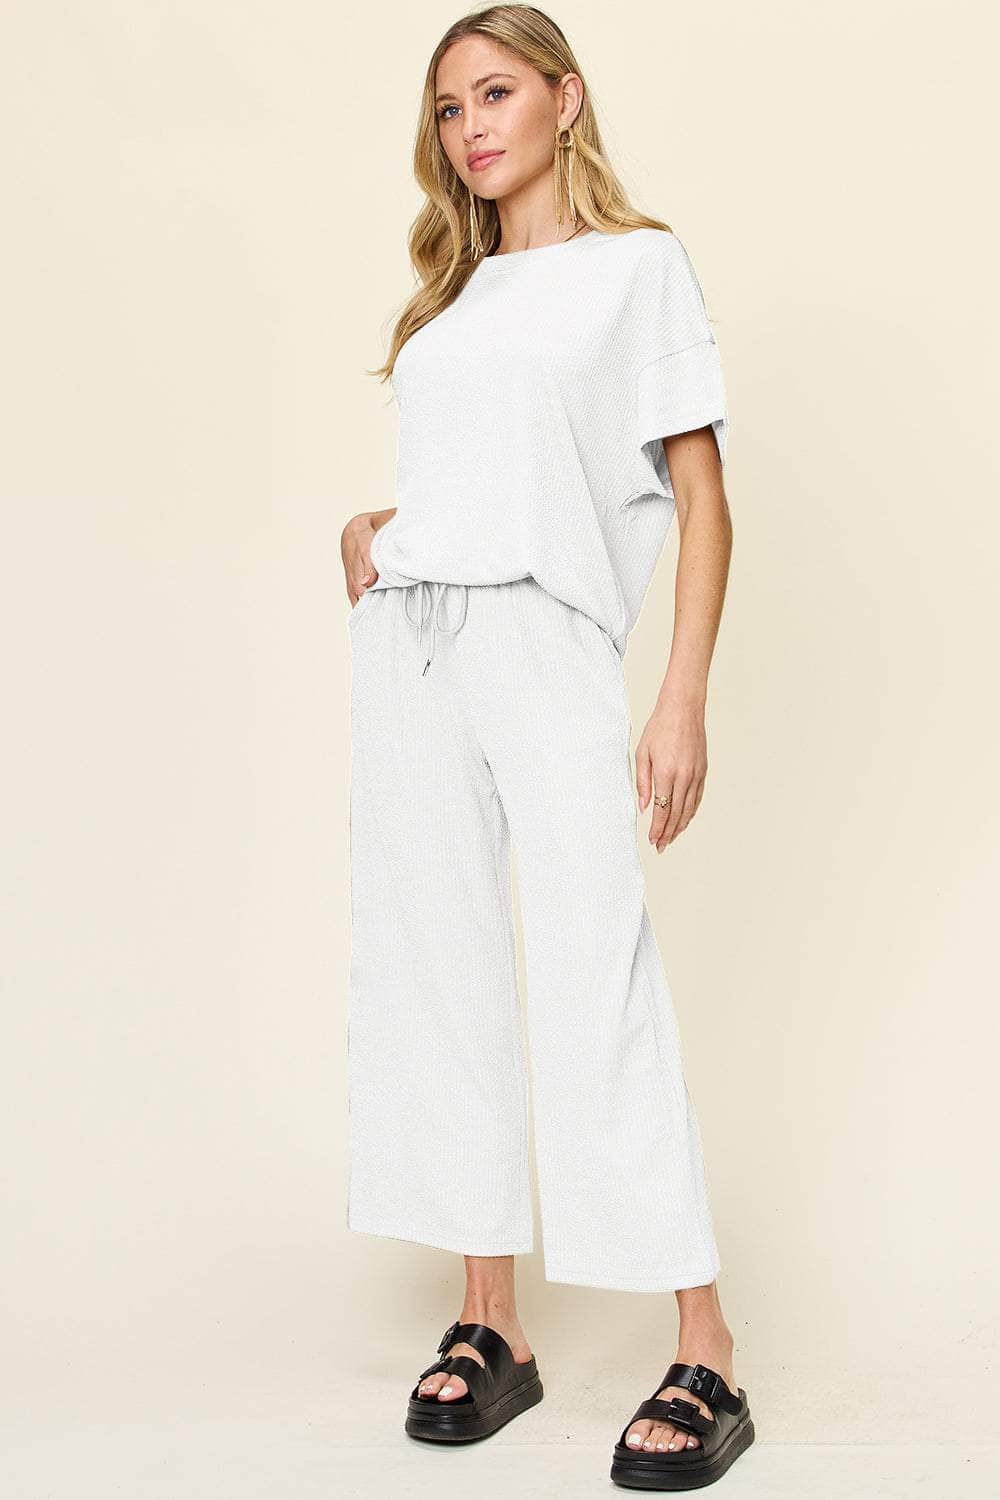 Double Take Full Size Texture Round Neck Short Sleeve T-Shirt and Wide Leg Pants White / S